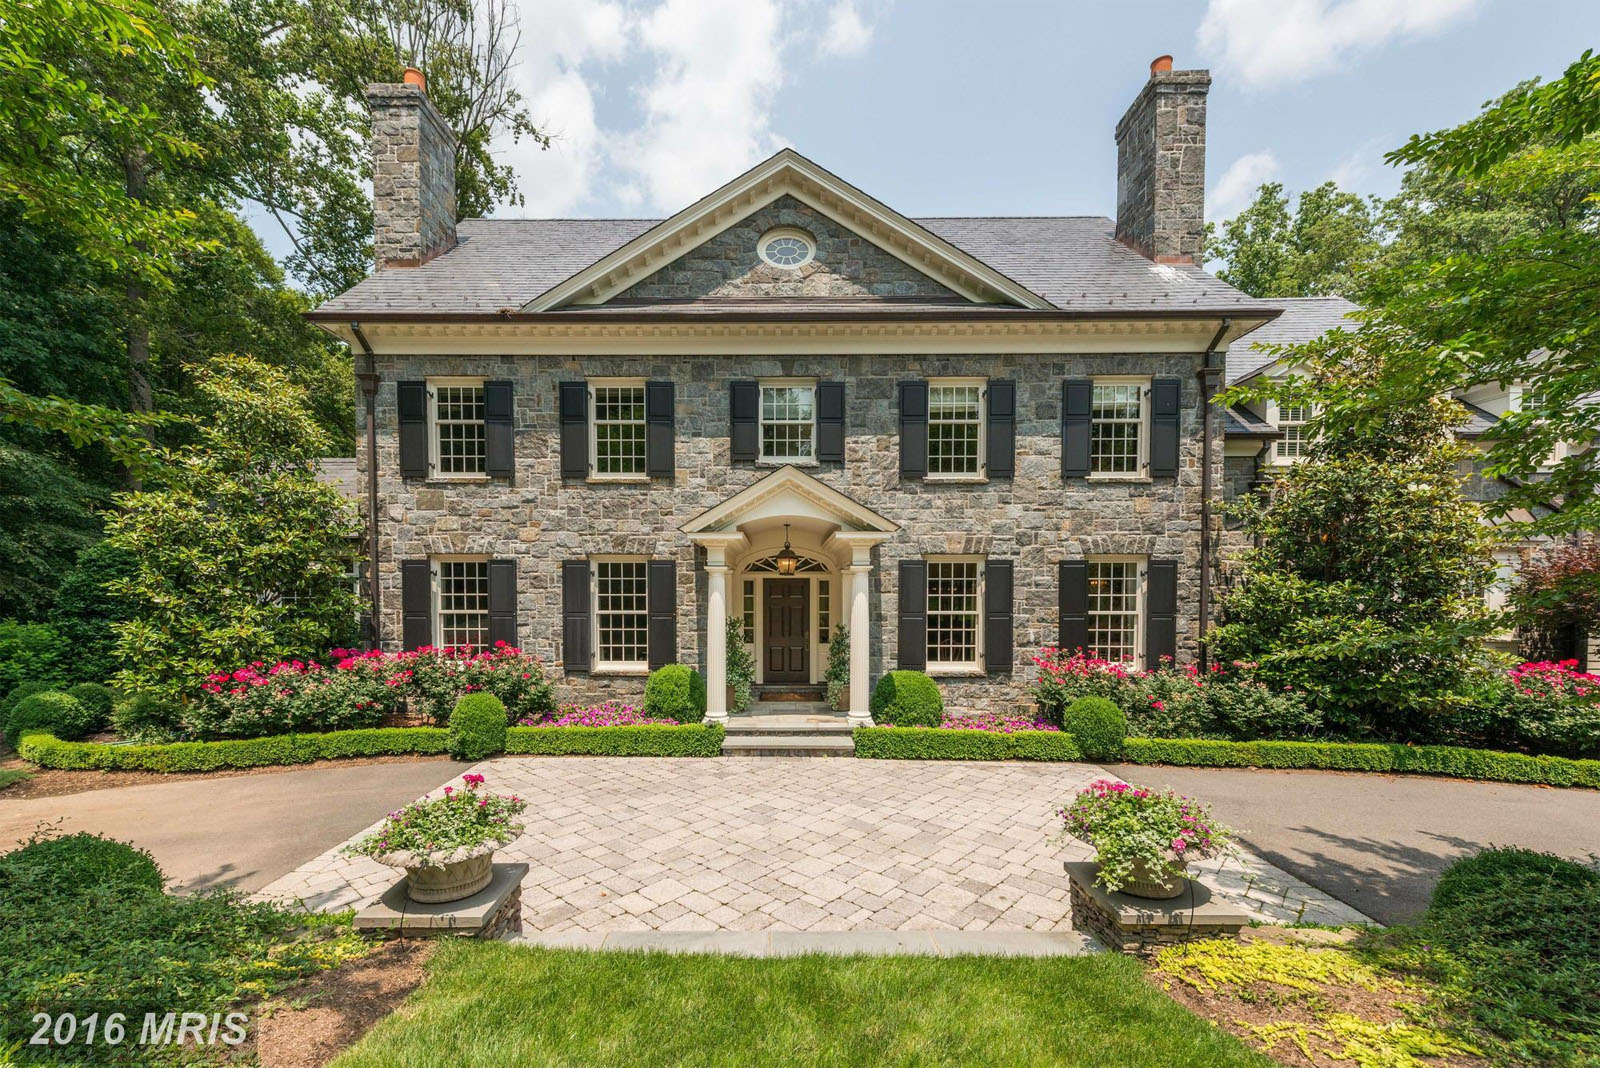 3. $5,000,000
This colonial in McLean built in 2006 has five bedrooms, seven bathrooms and one half bath. (MRIS)